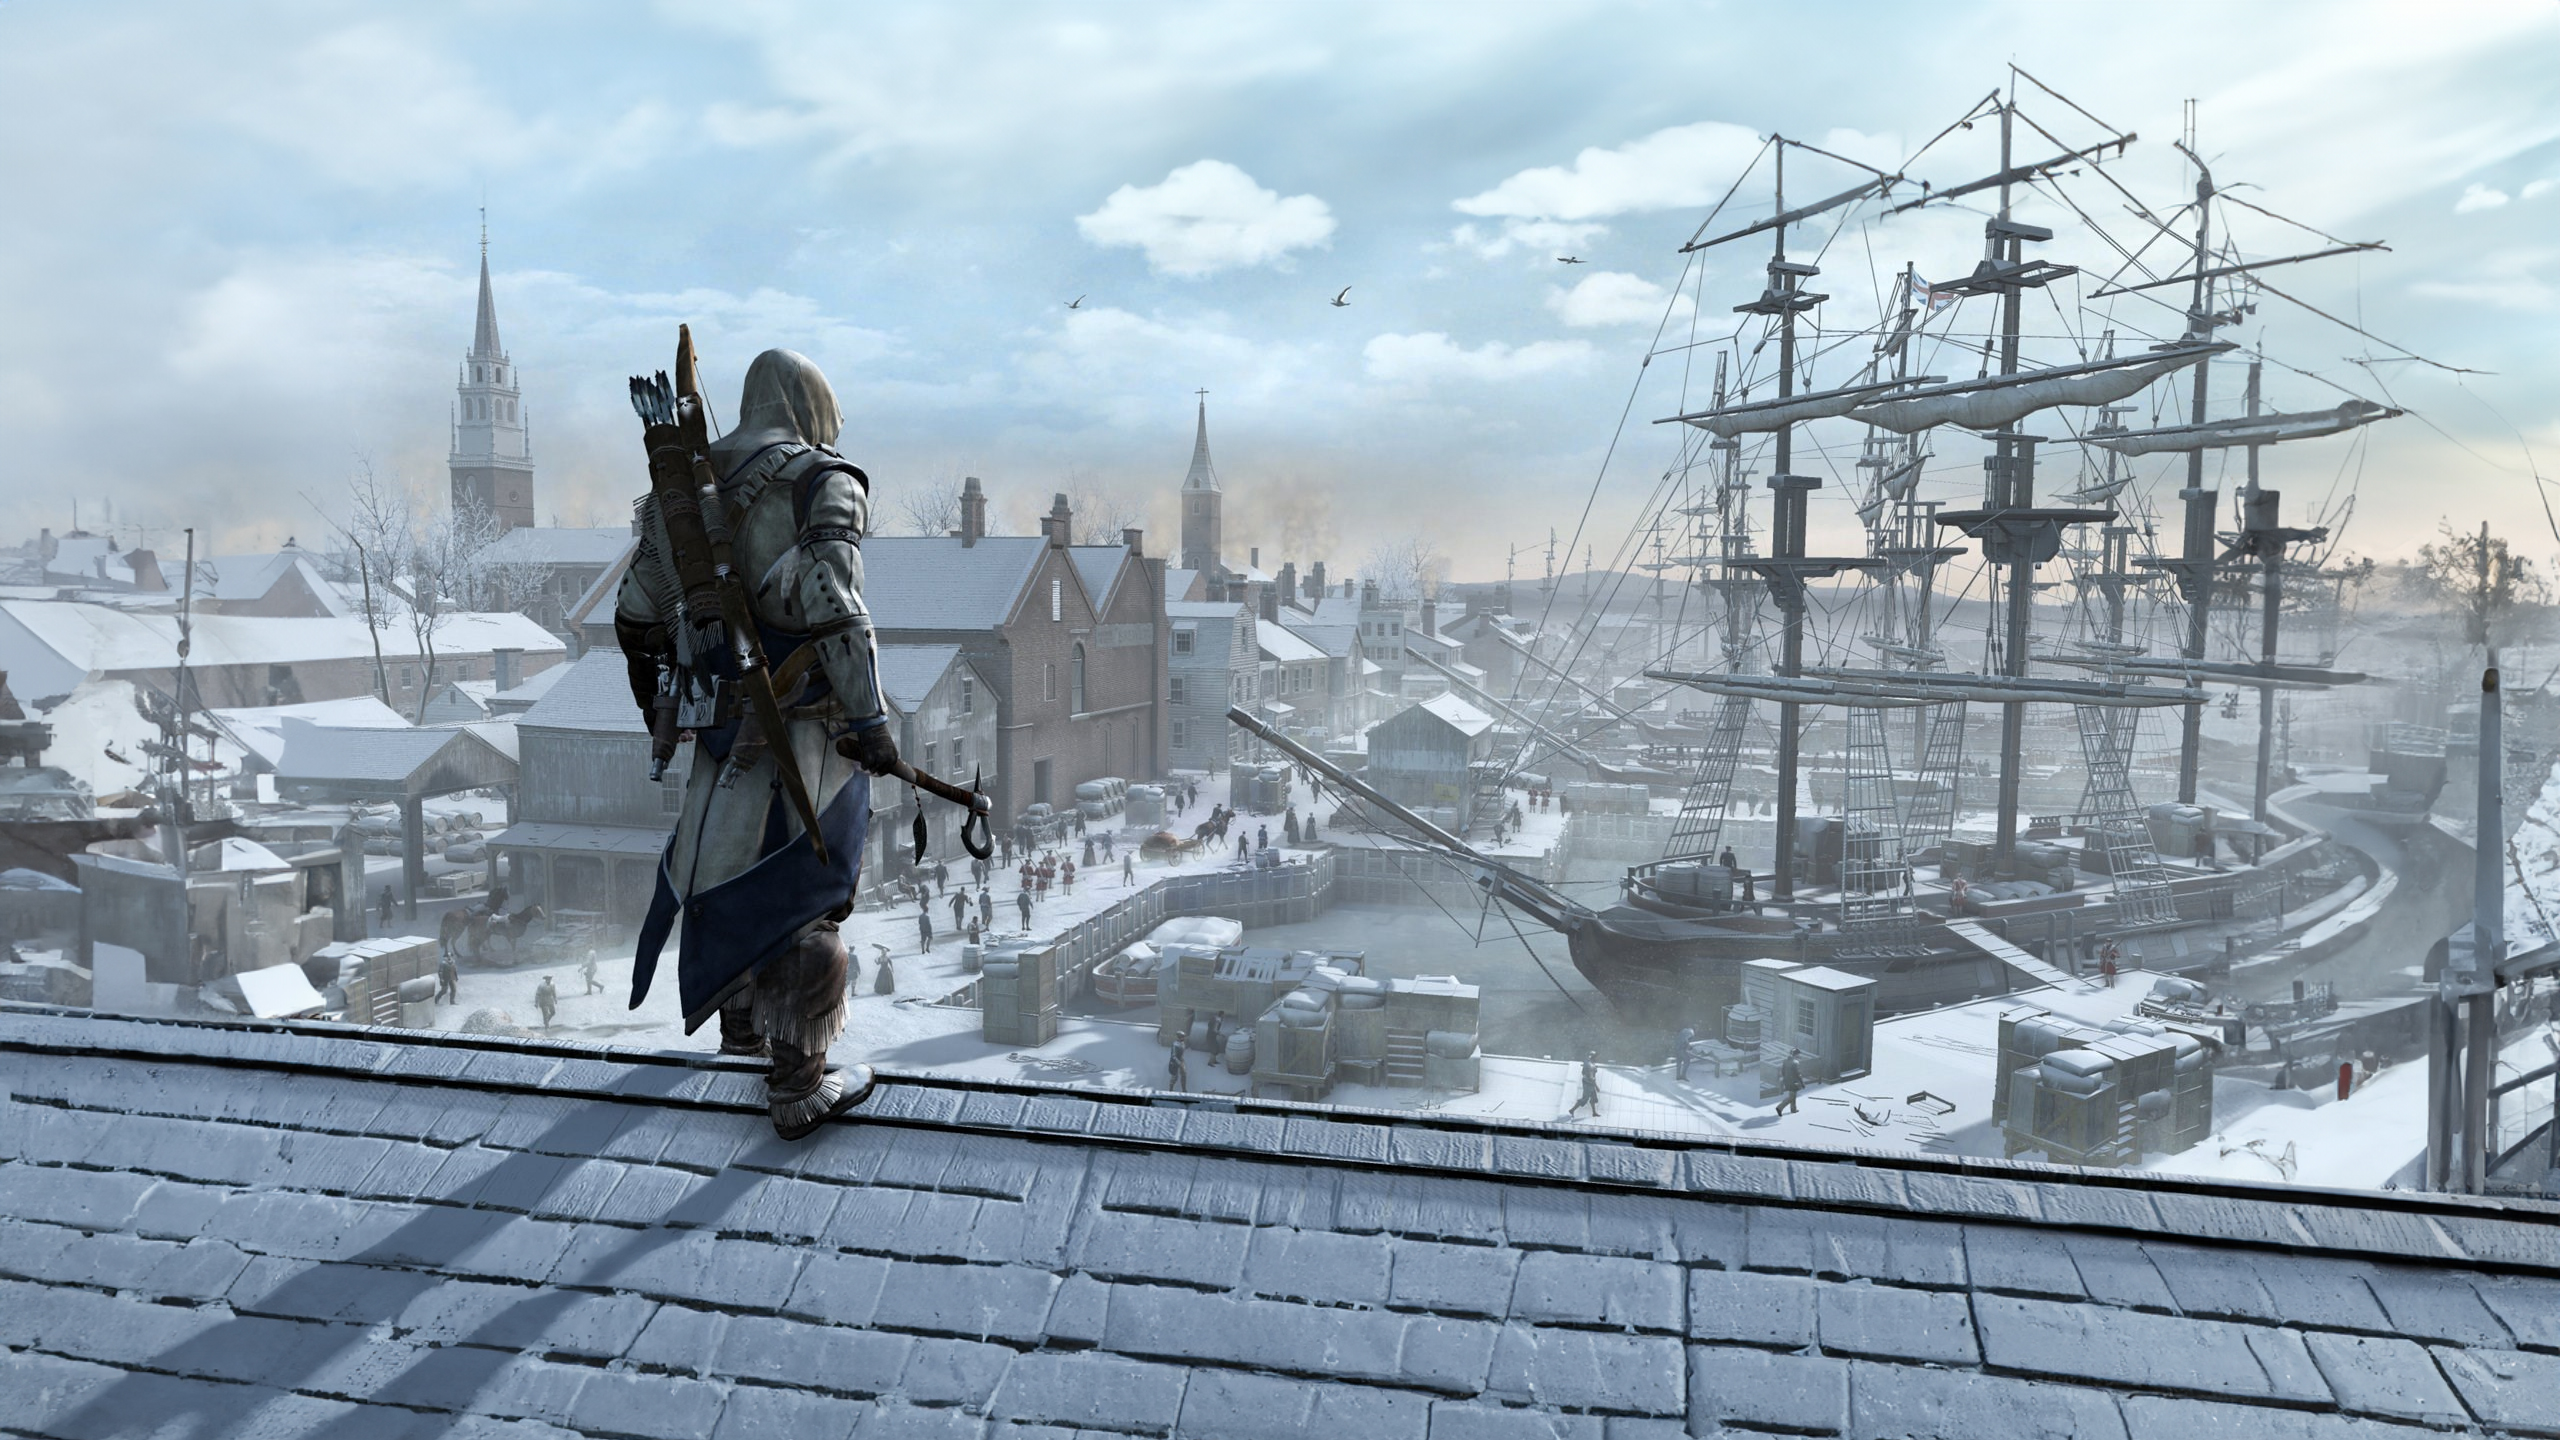 General 2560x1440 Photoshop Generative Fill Assassin's Creed winter video games Assassin's Creed III Connor Kenway axes video game characters sky clouds ship video game art snow building